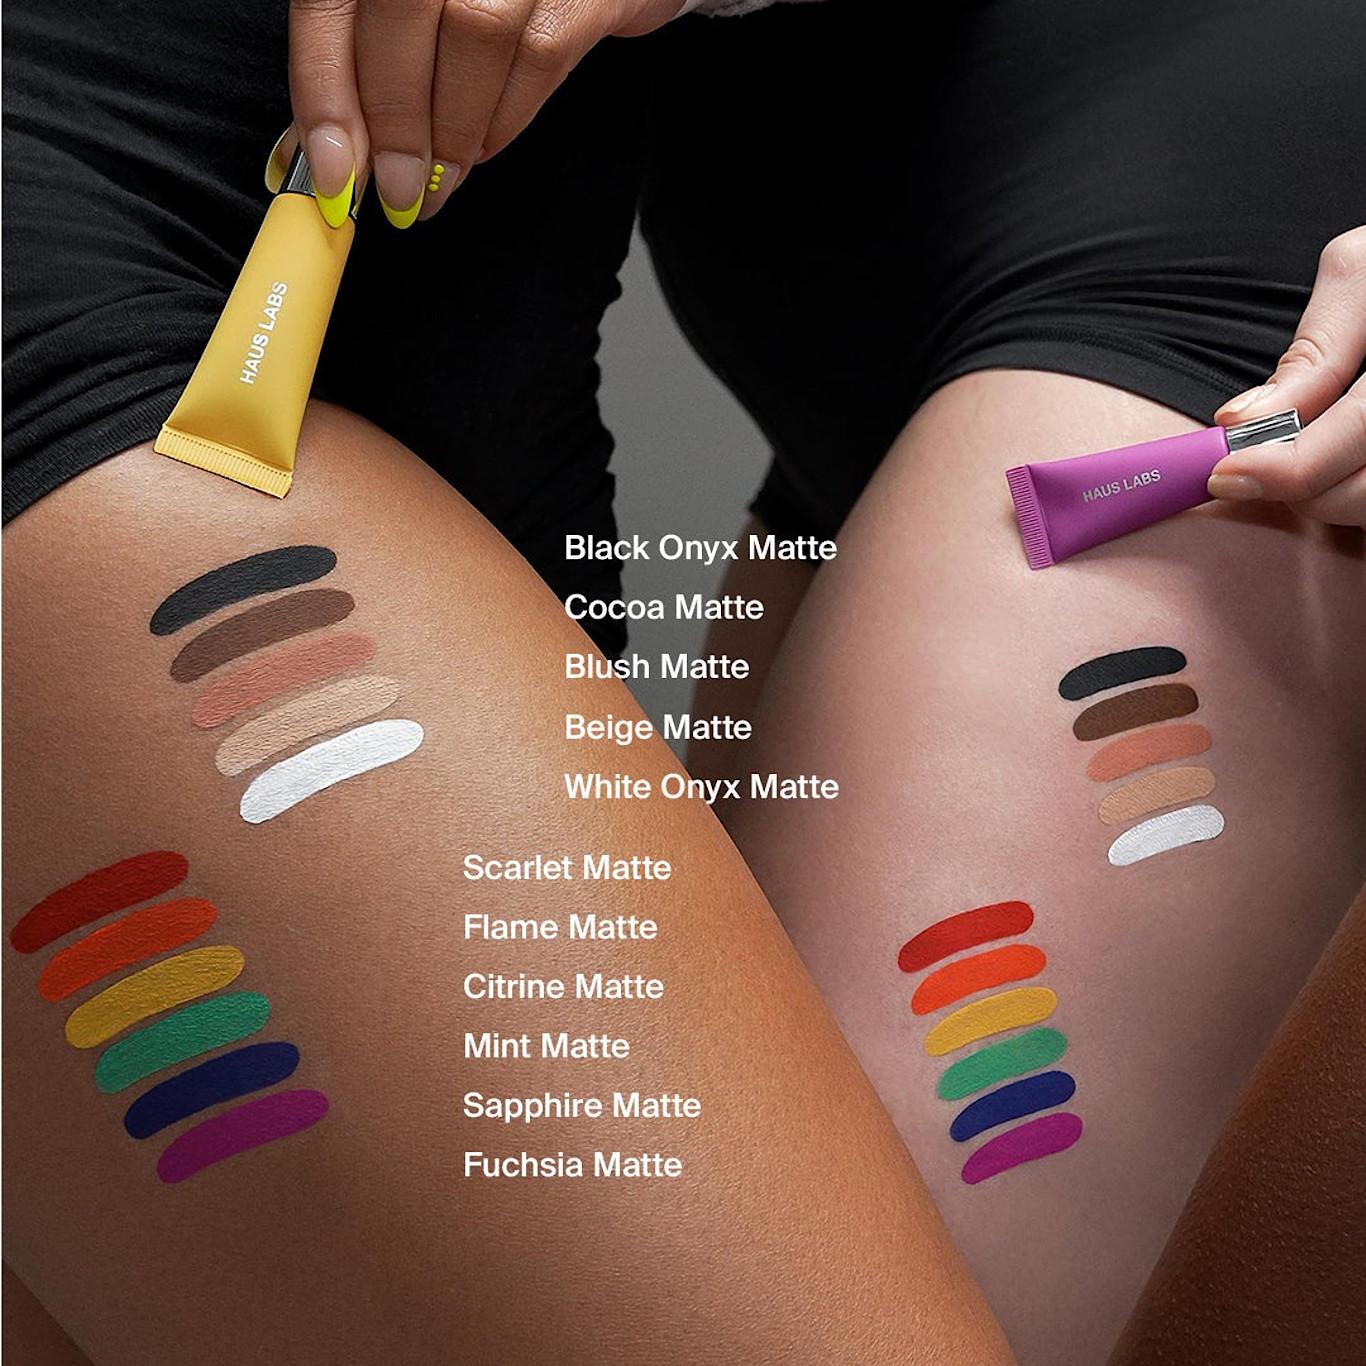 HAUS Labs Supercharged Clean Artistry Makeup Line Hy Power Pigment Paint Arm Swatches